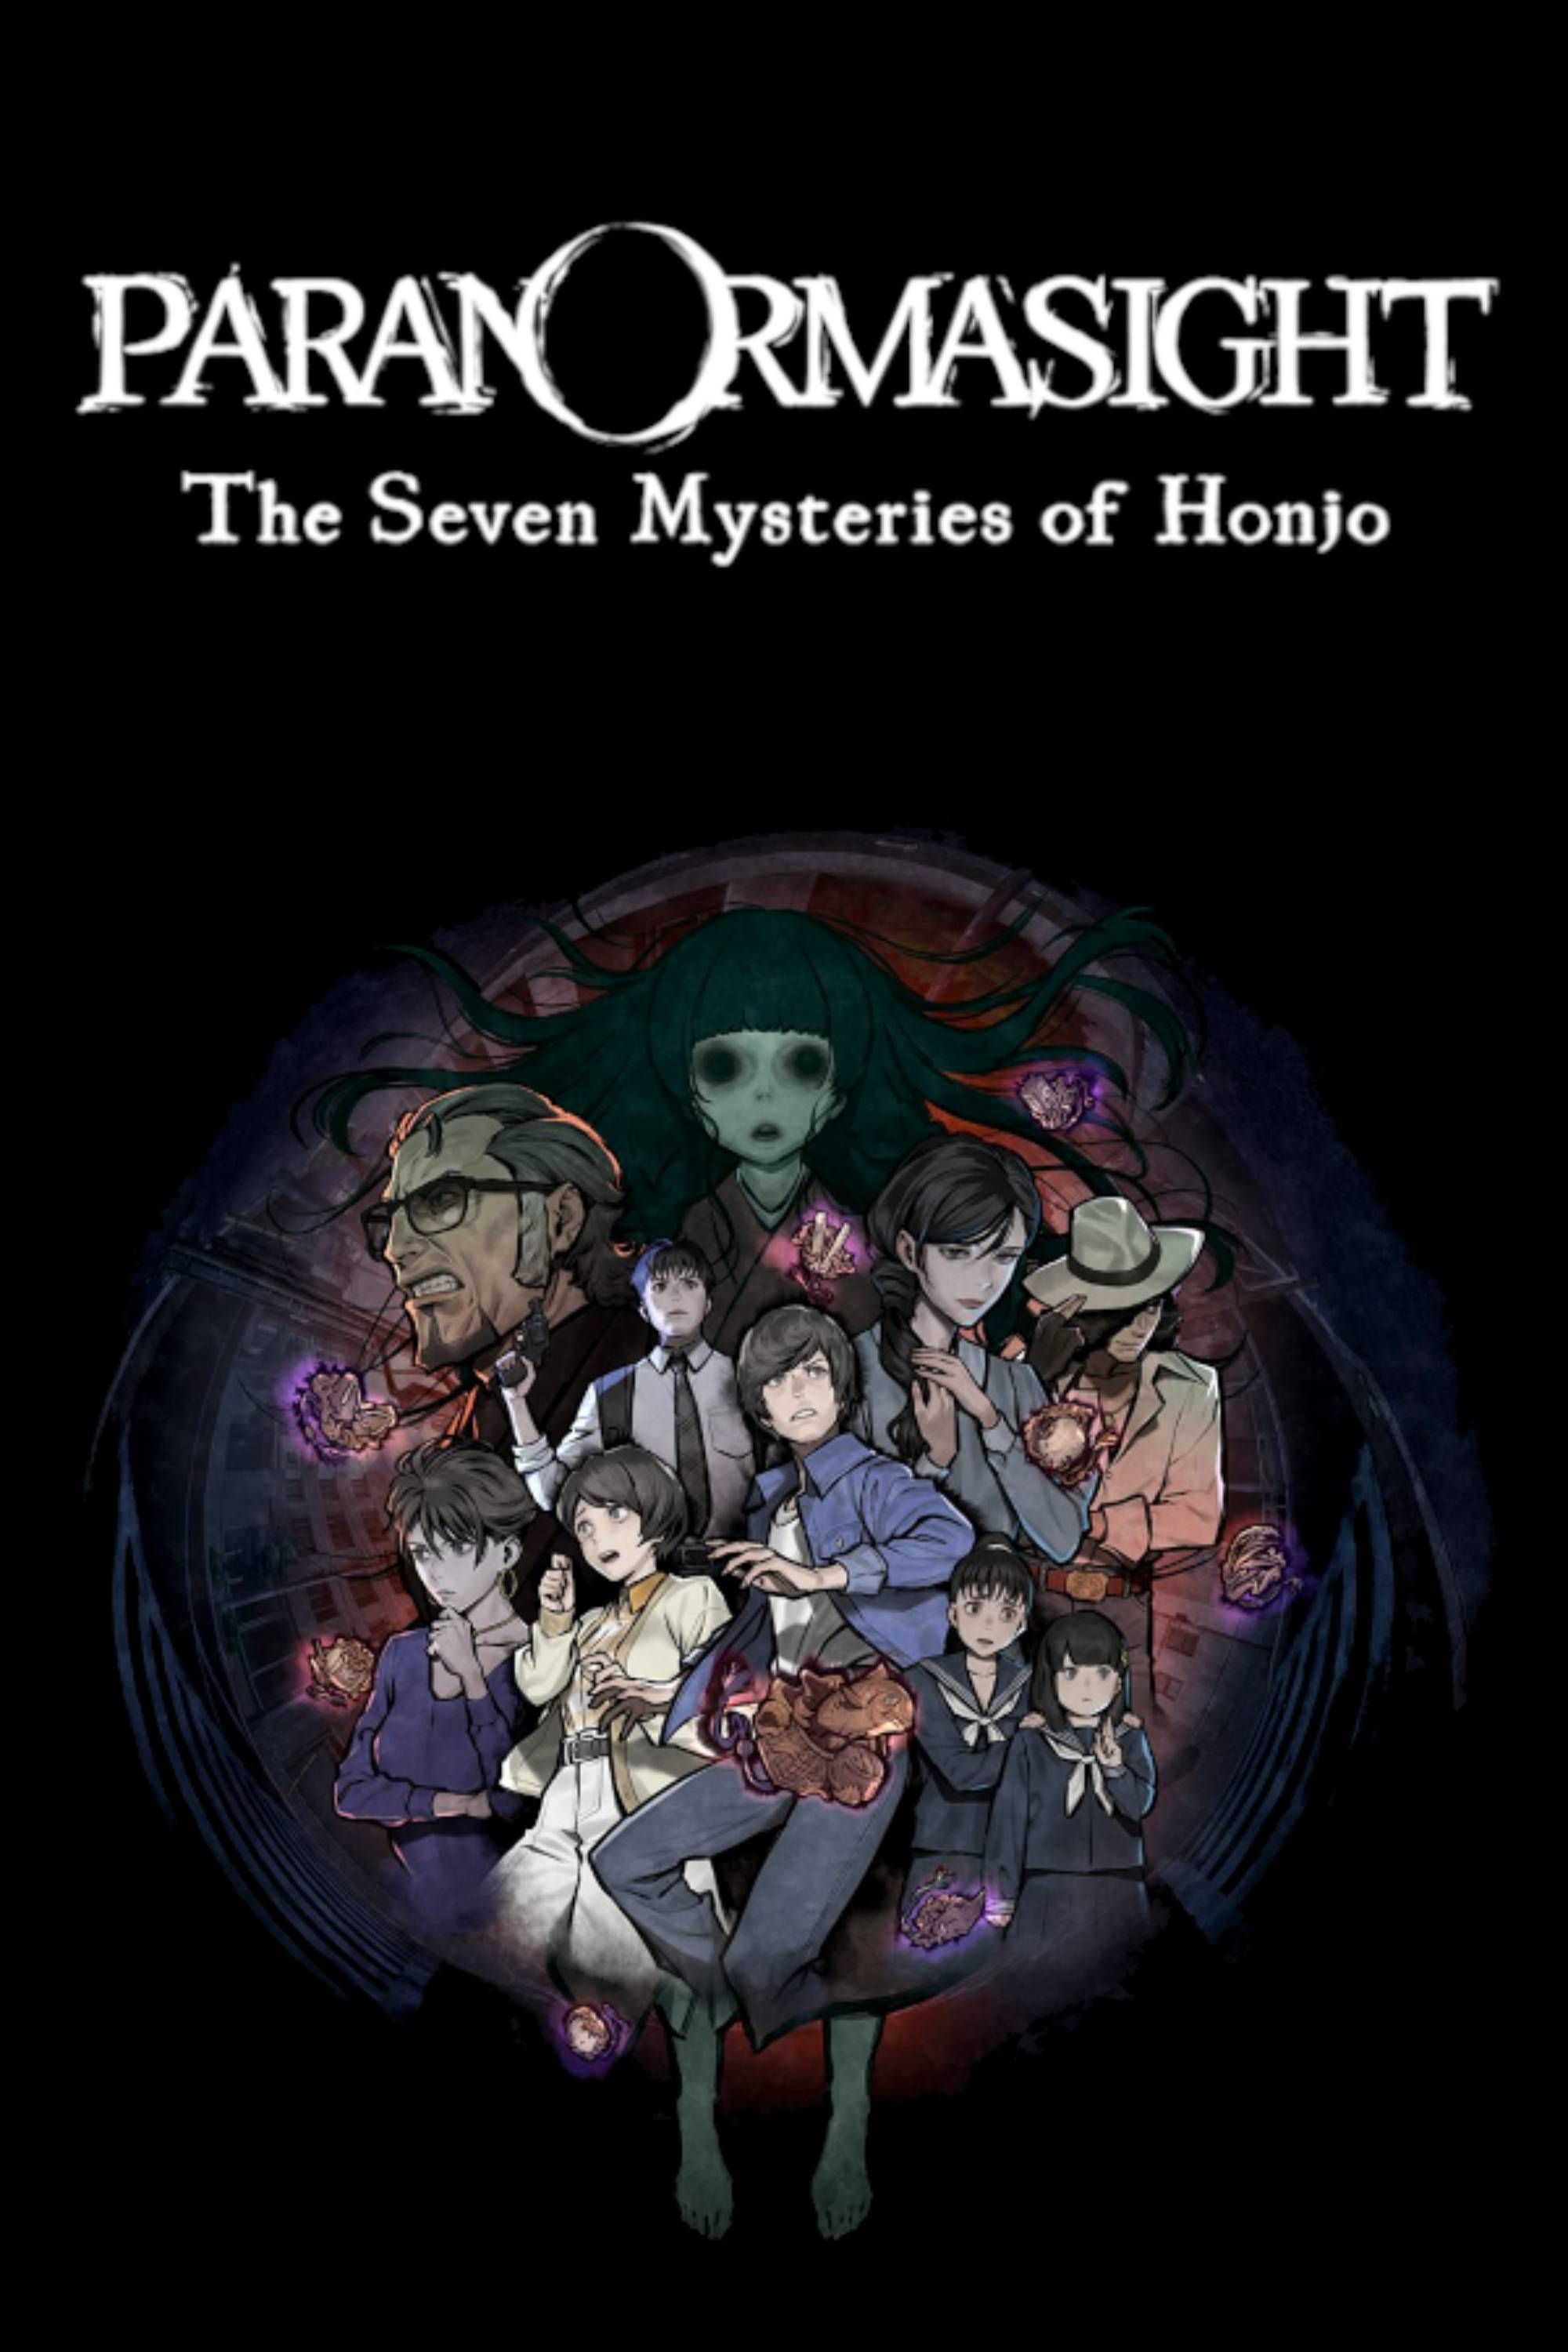 Paranormasight_ The Sveen Mysteries of Honjo